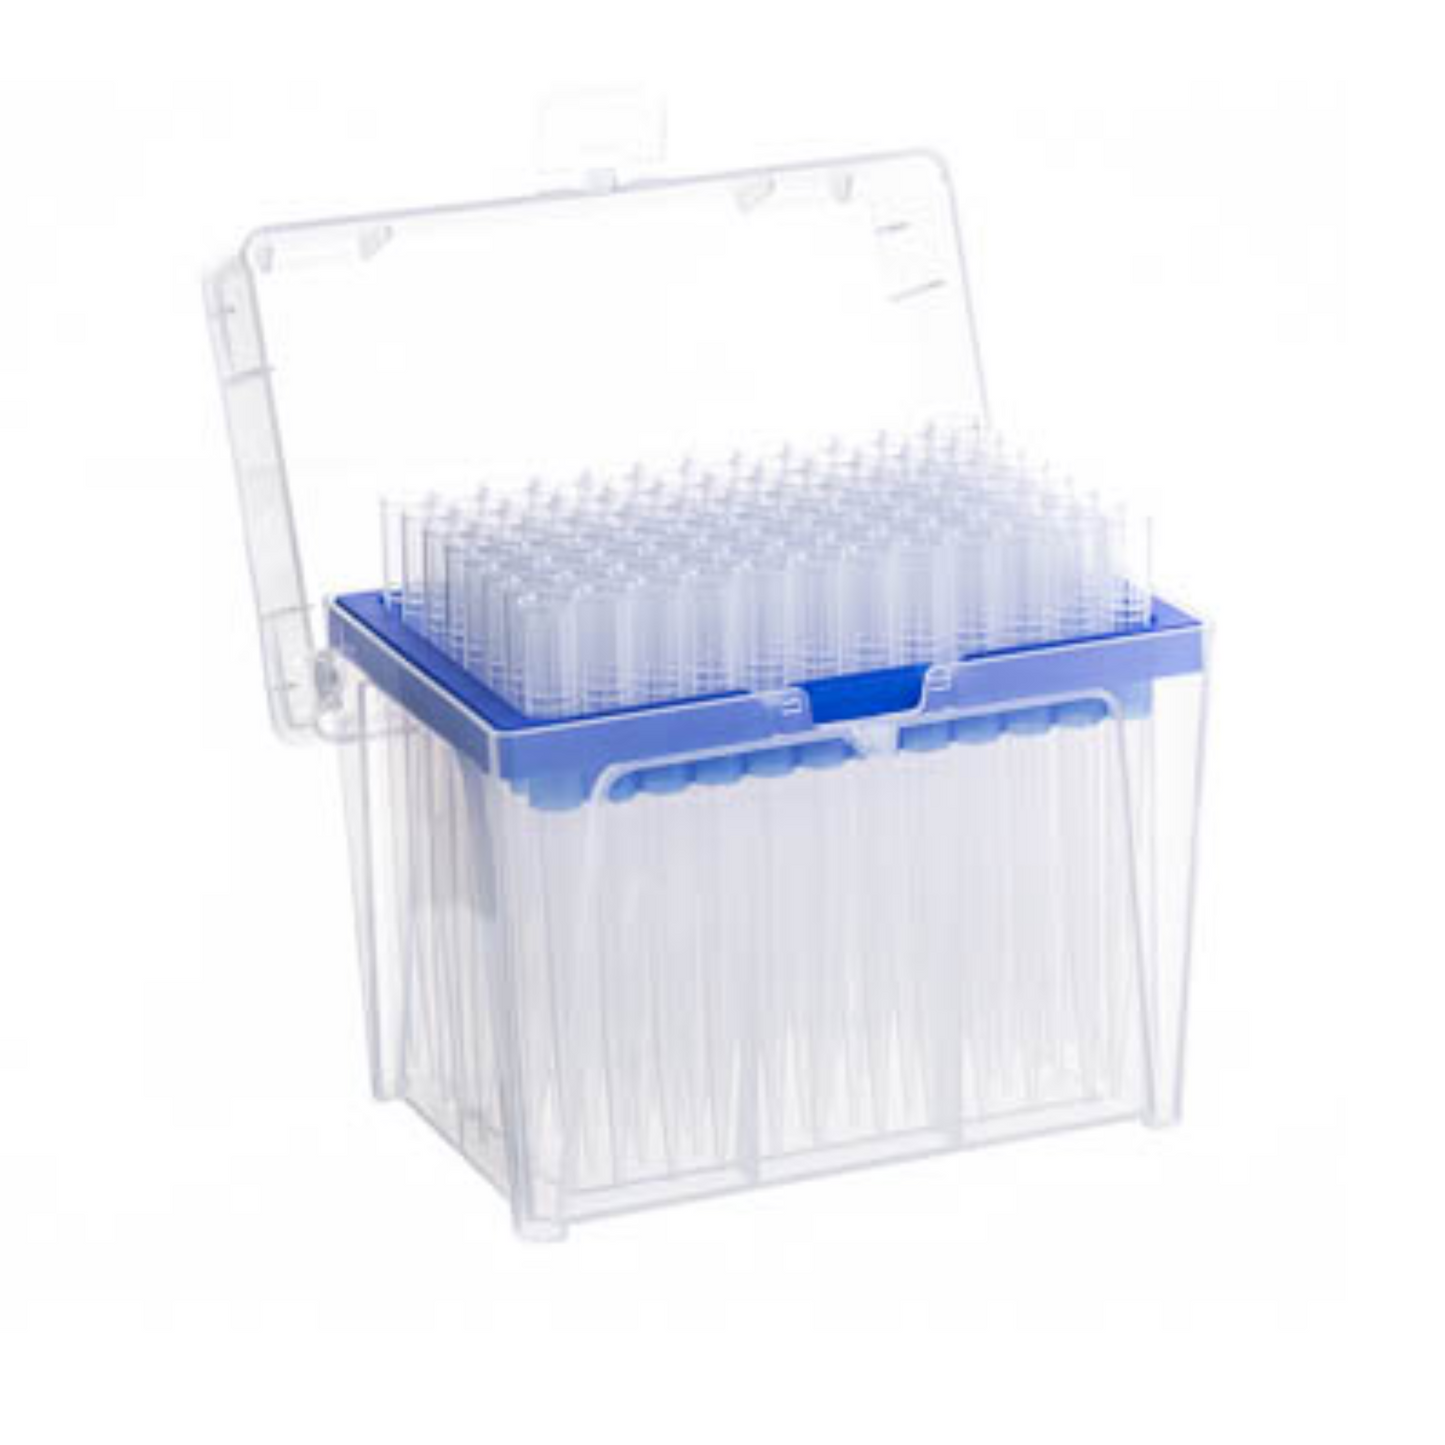 Greiner Sapphire Pipette Tip, 1250µl, low retention, natural, Non-sterile, Pack of 960 (778361)